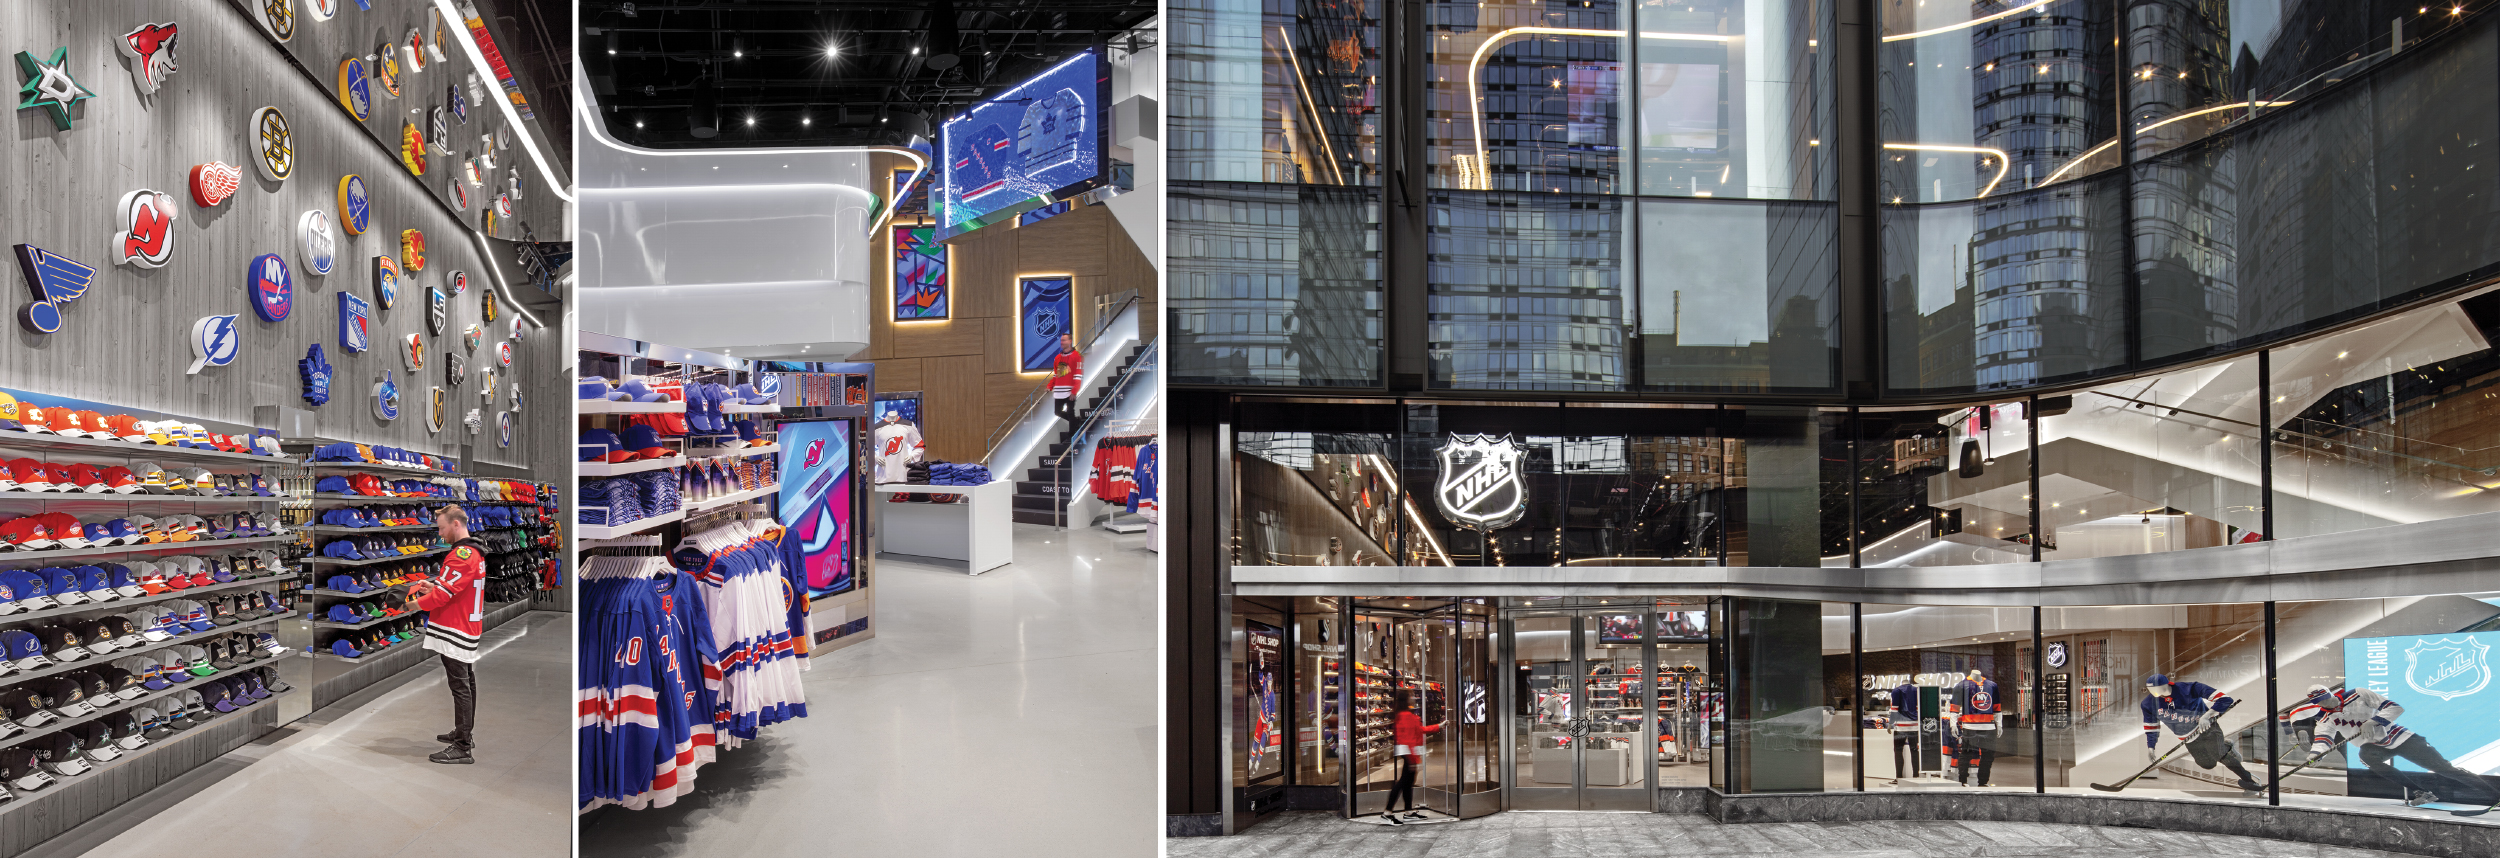 Left: A feature wall clad in barn siding highlights various NHL team logos with caps merchandised underneath, encouraging shoppers to browse. 